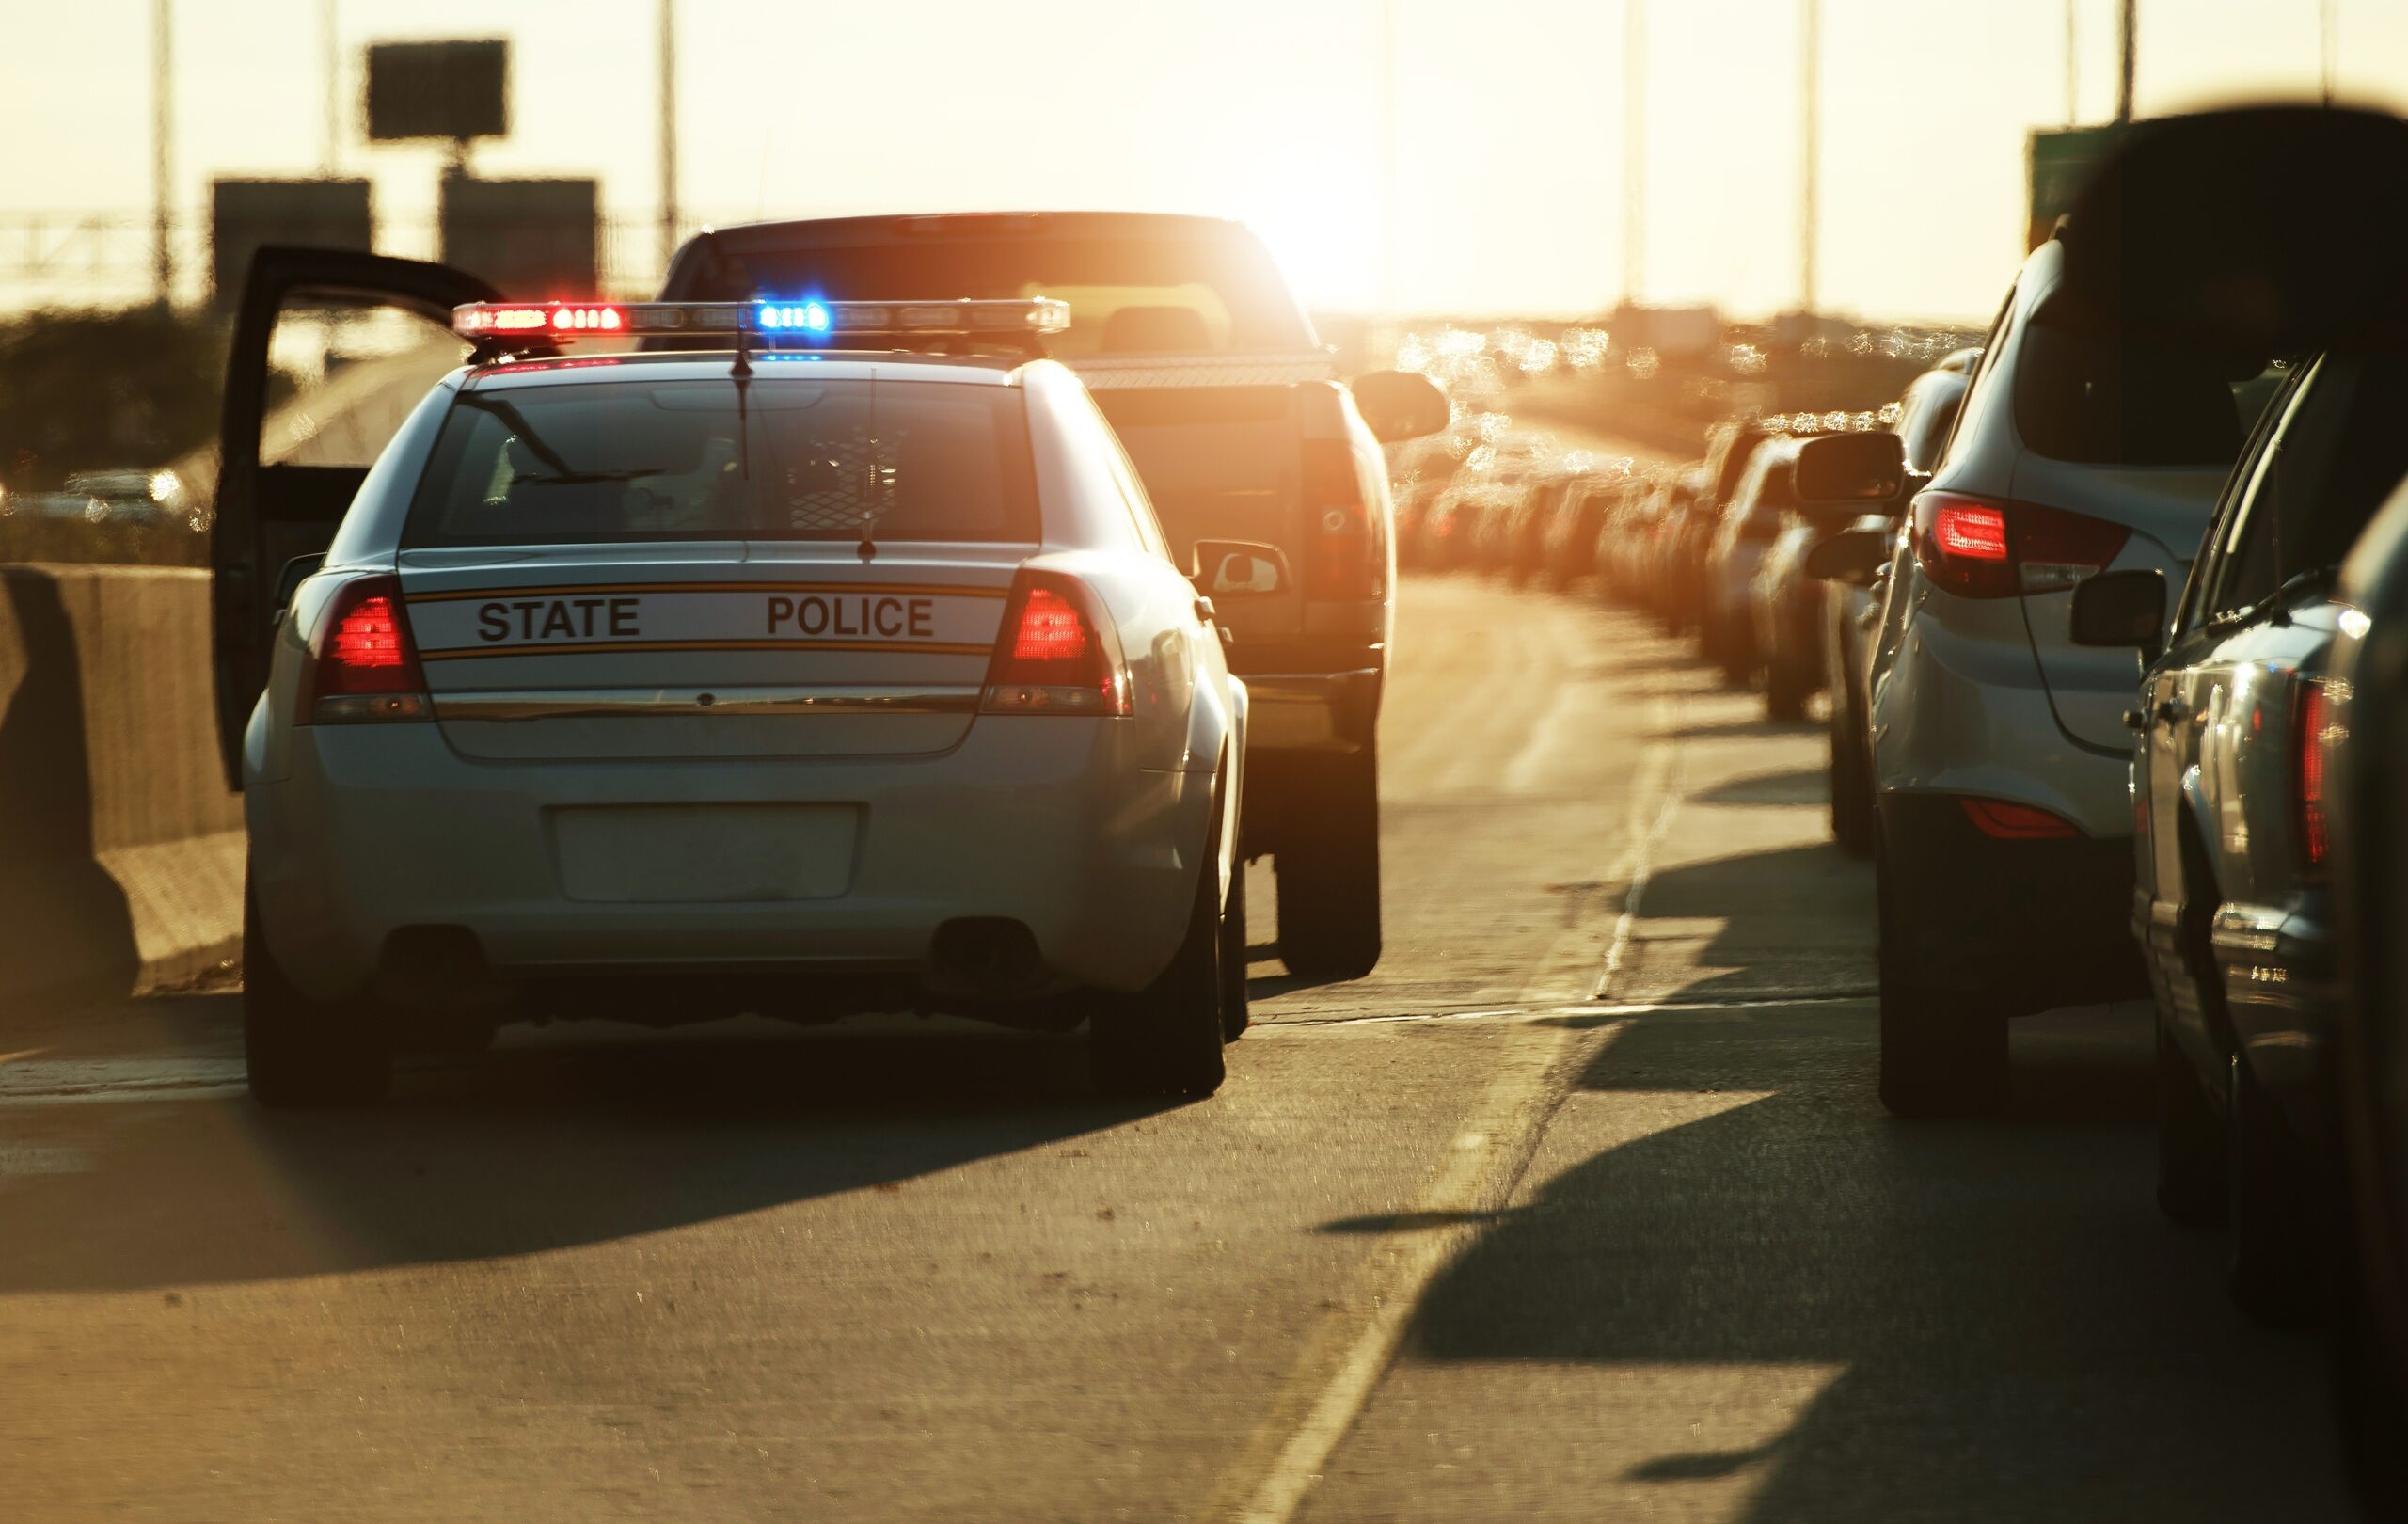 An out-of-state police car with flashing lights stopped on a busy highway during sunset, causing a slight traffic delay.